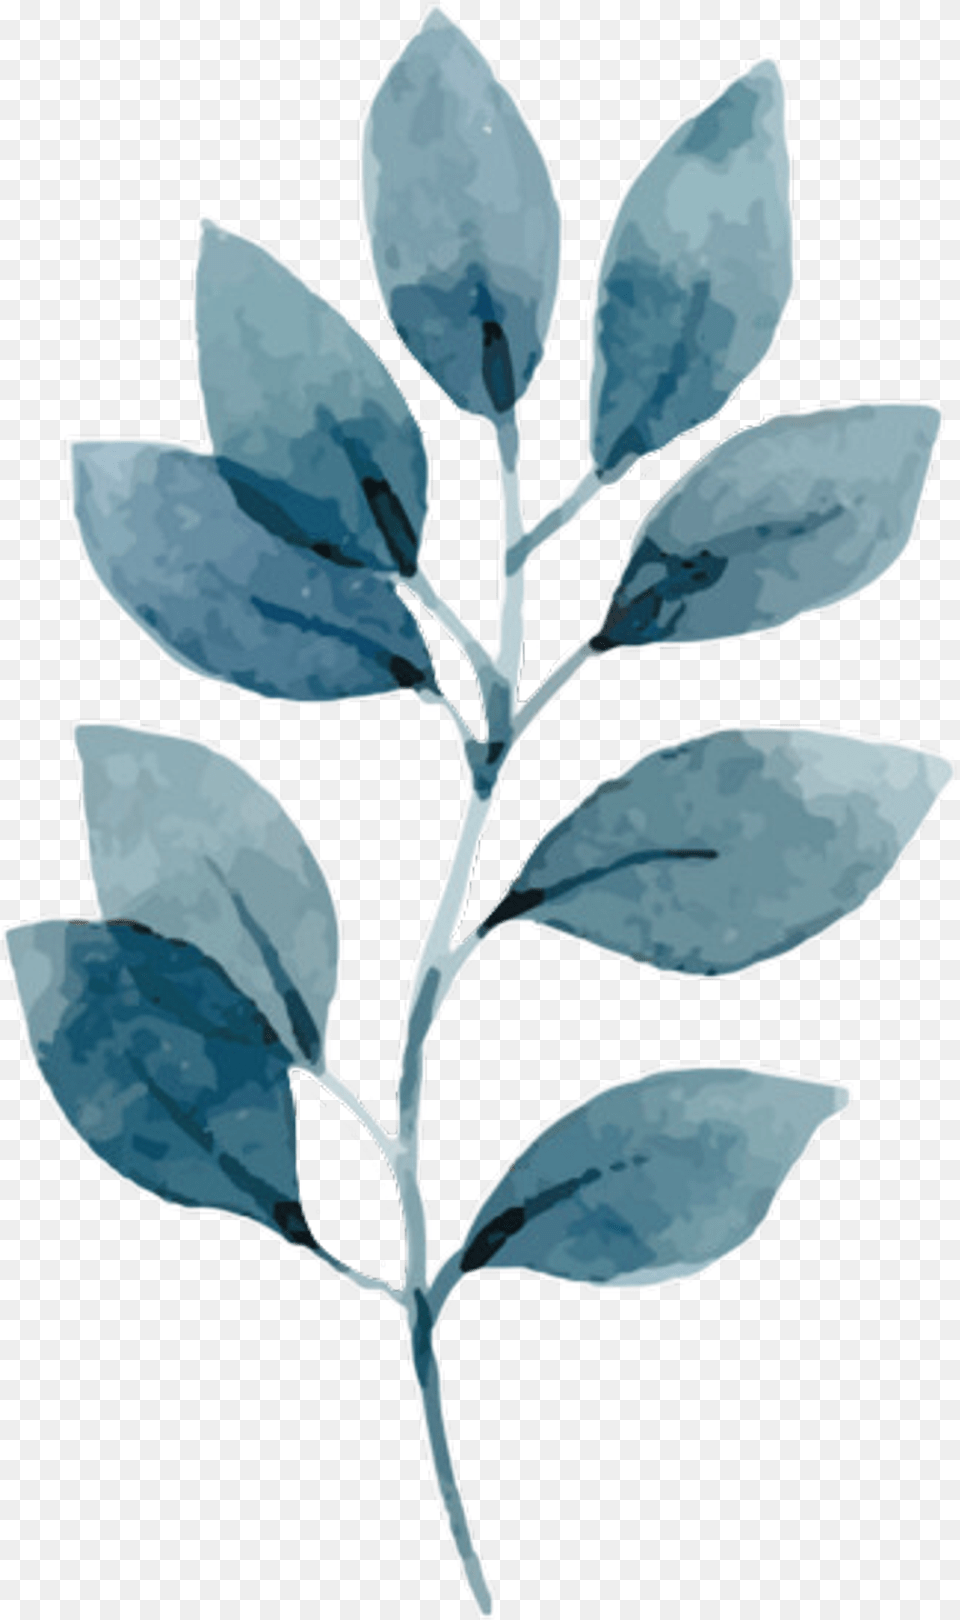 Download Watercolor Leaves Watercolour Tropical Leaves Leaf, Plant, Ice, Herbs, Herbal Free Transparent Png